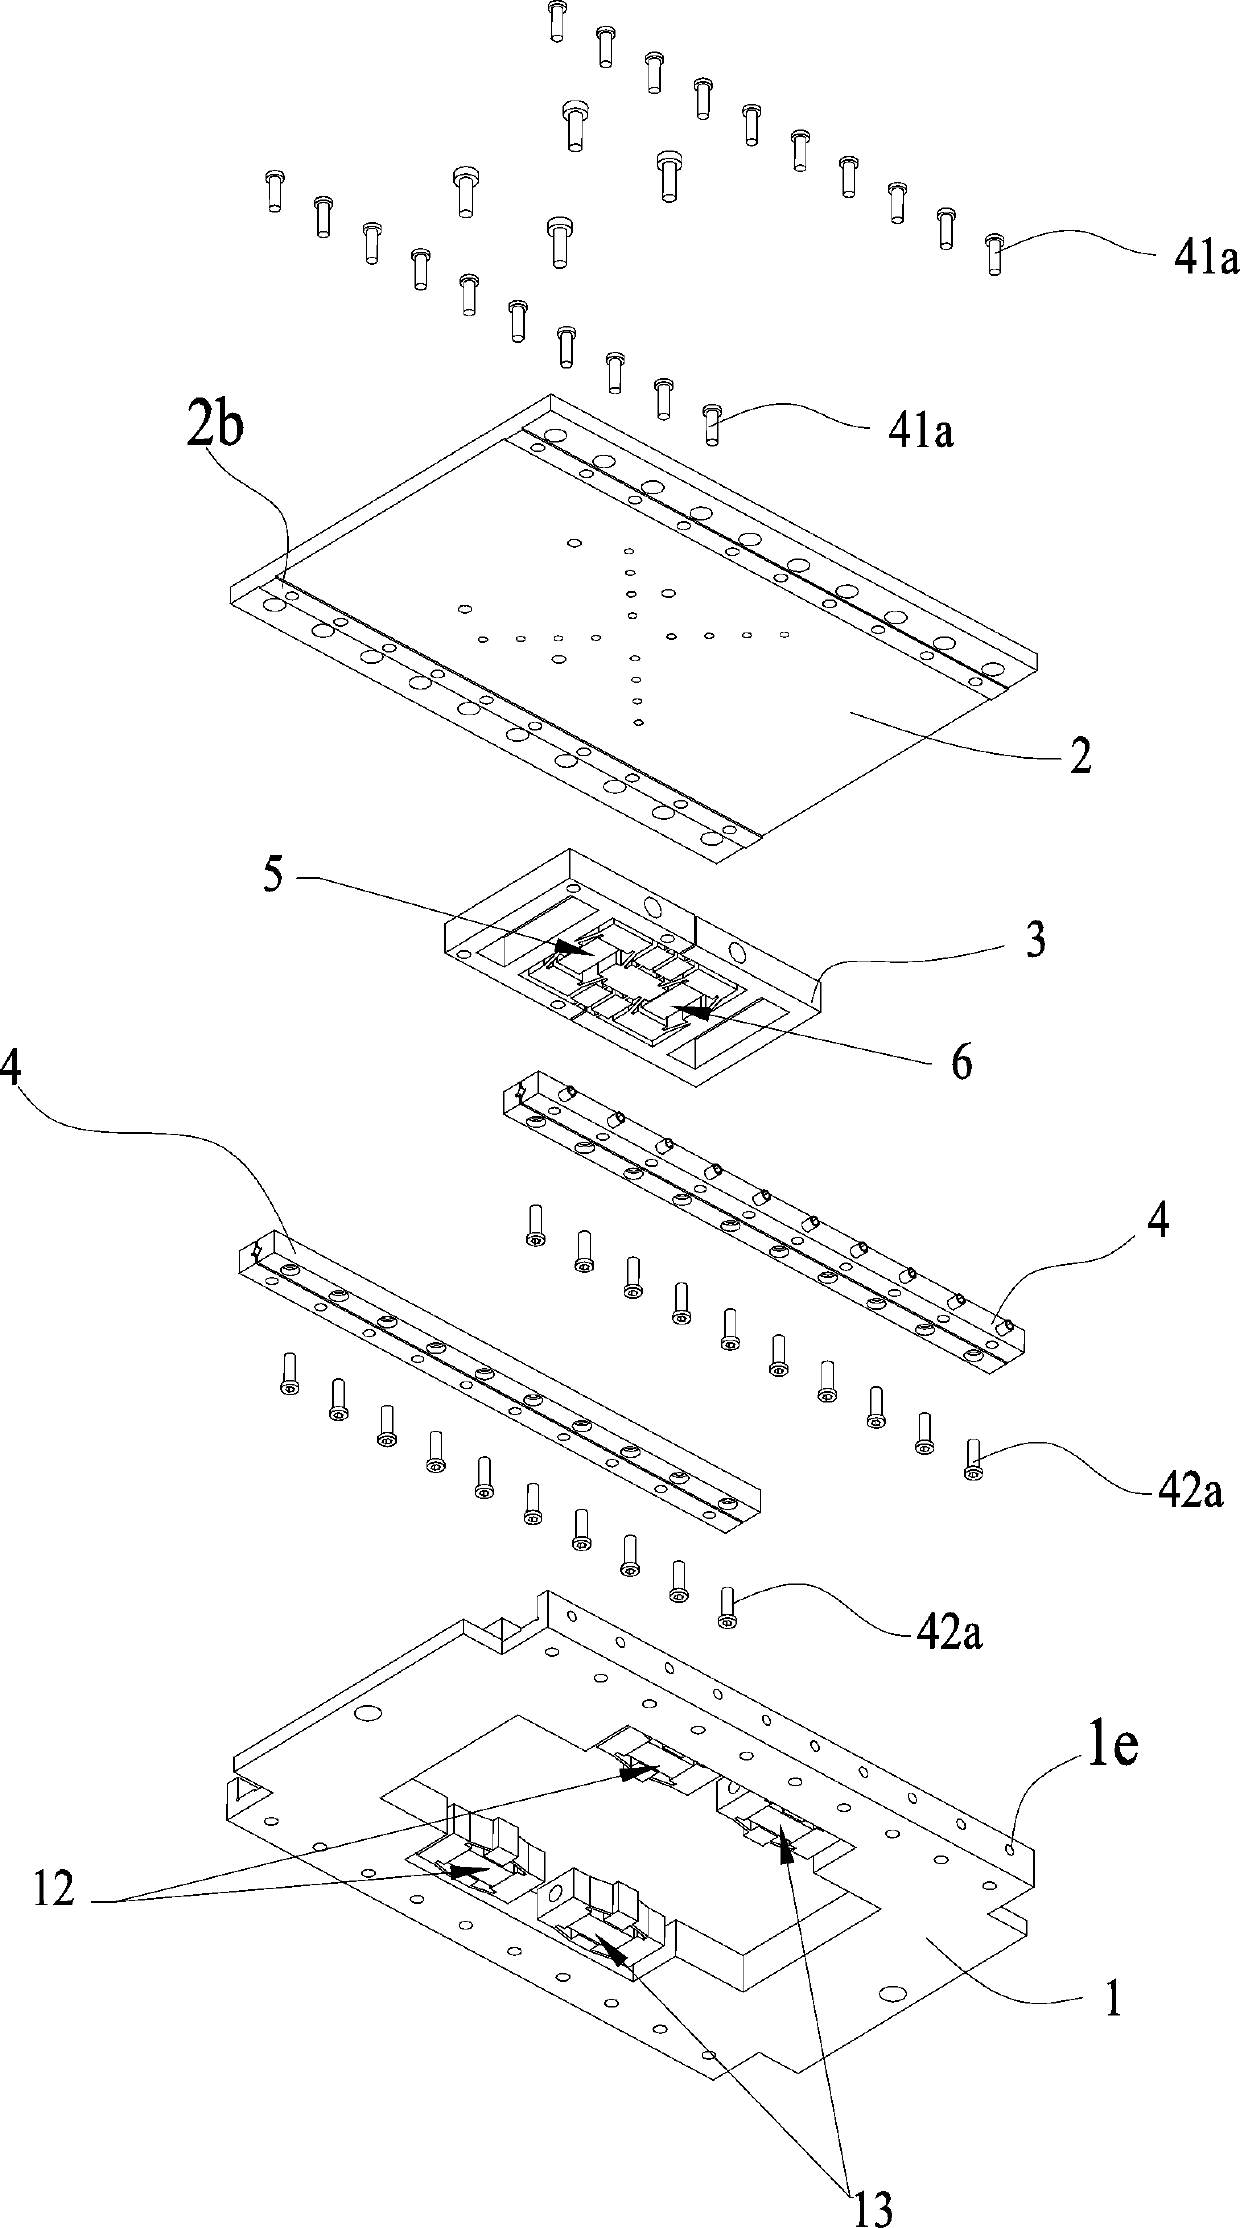 A full-displacement amplified piezoelectric inchworm linear stage